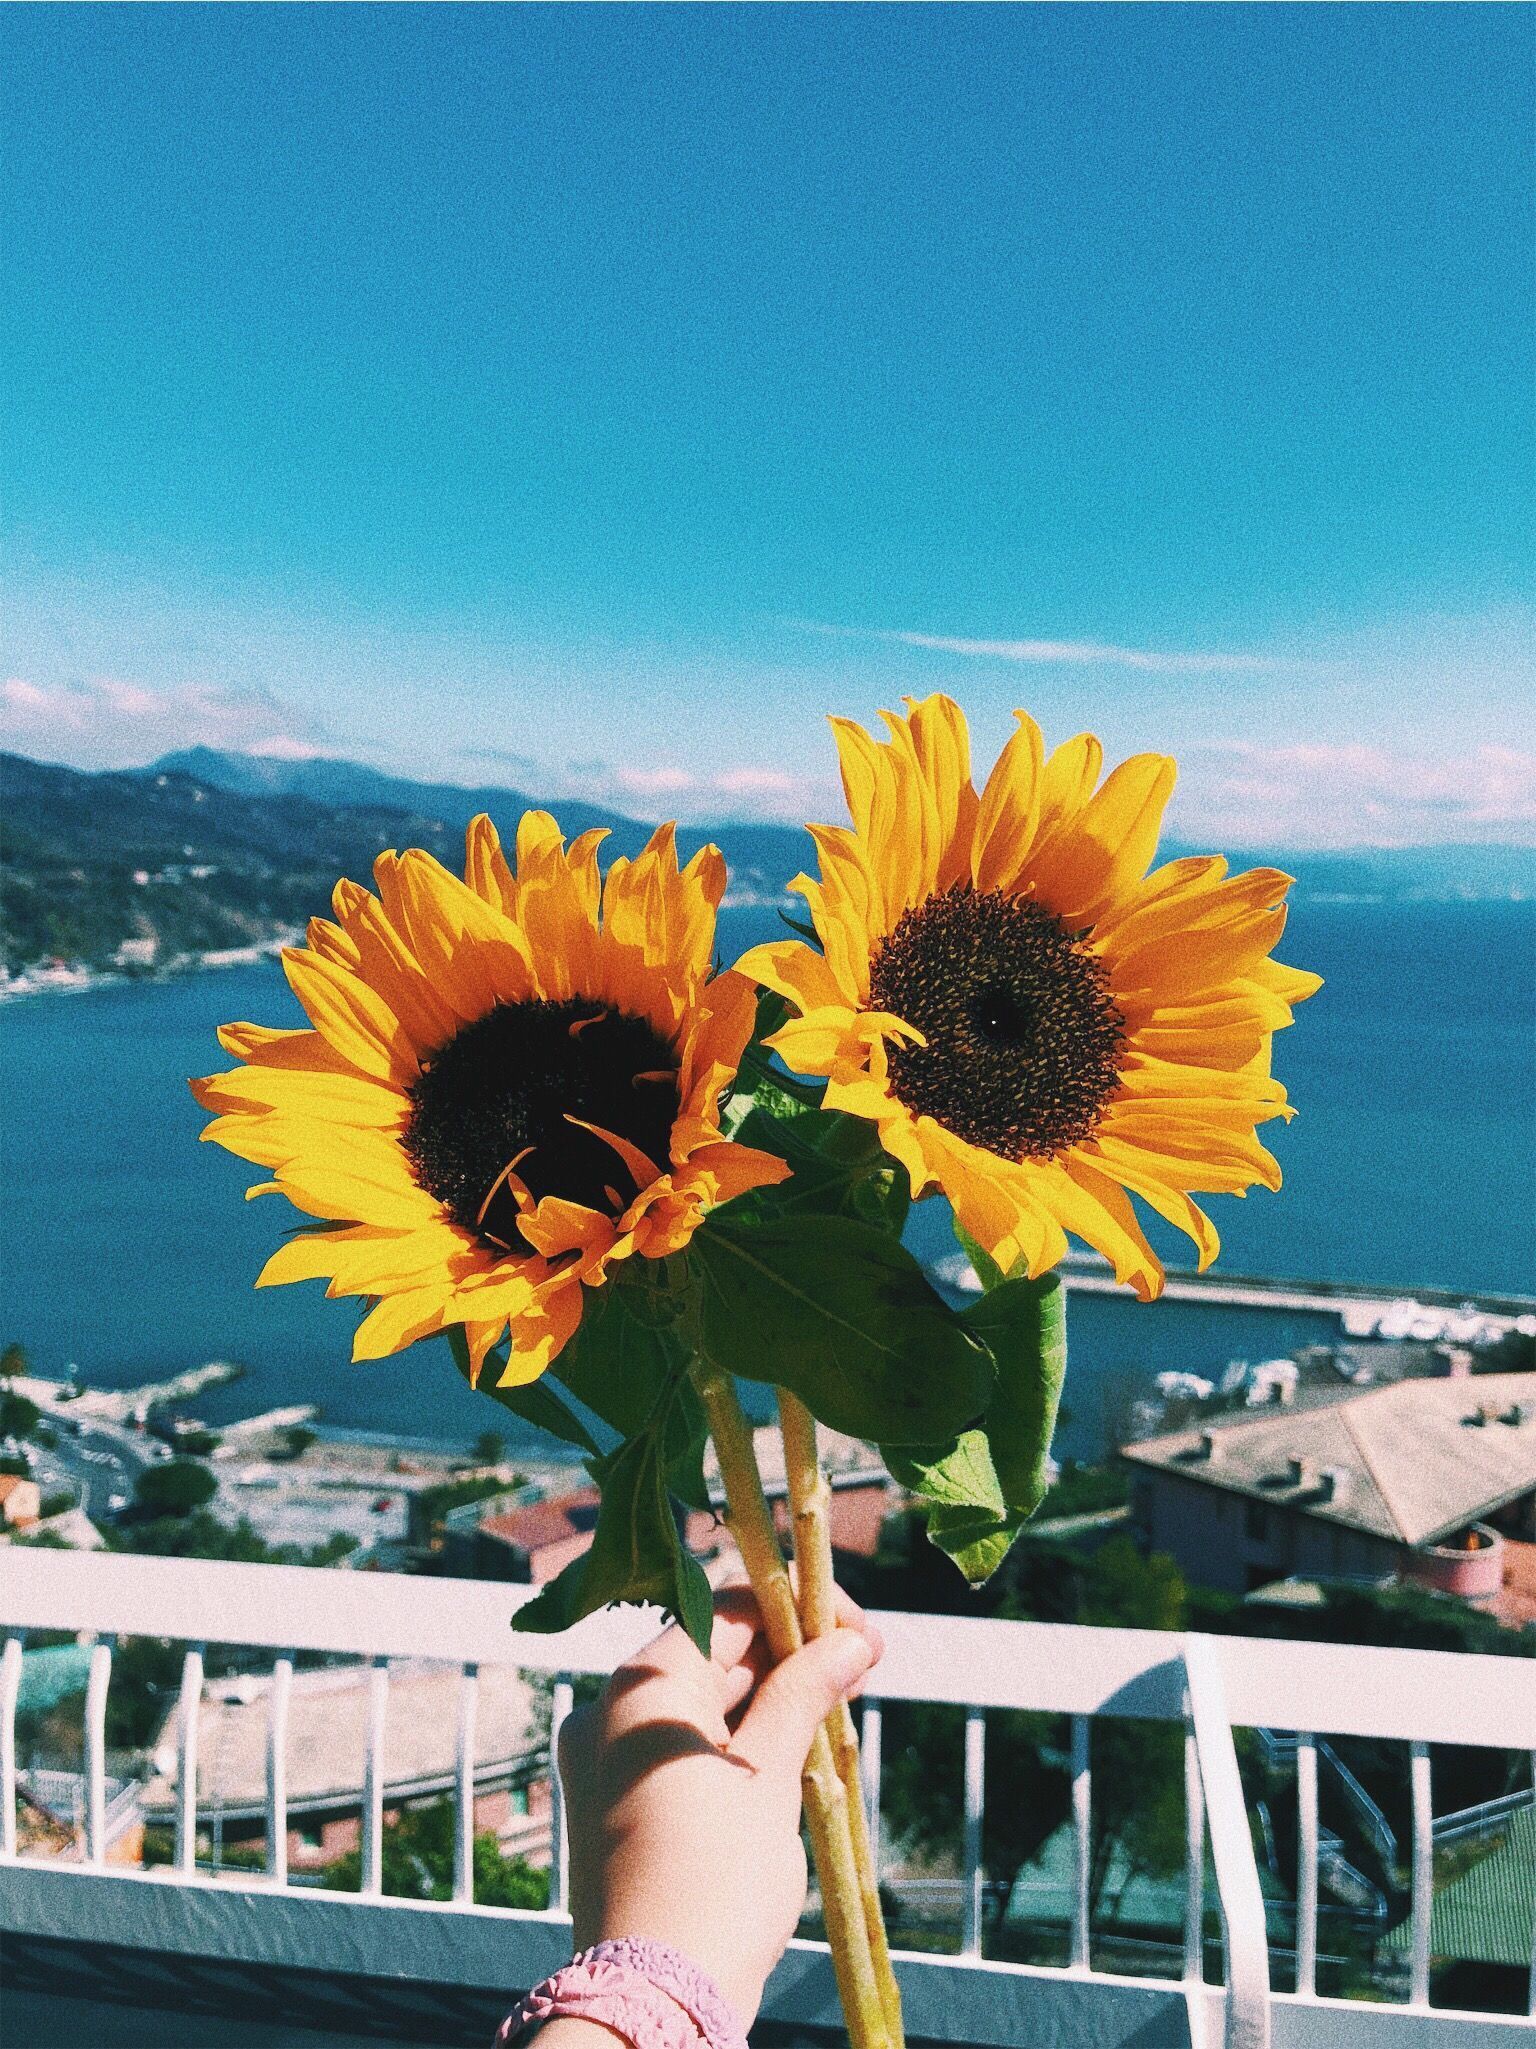 A person holding two yellow sunflowers in front of a body of water - Bright